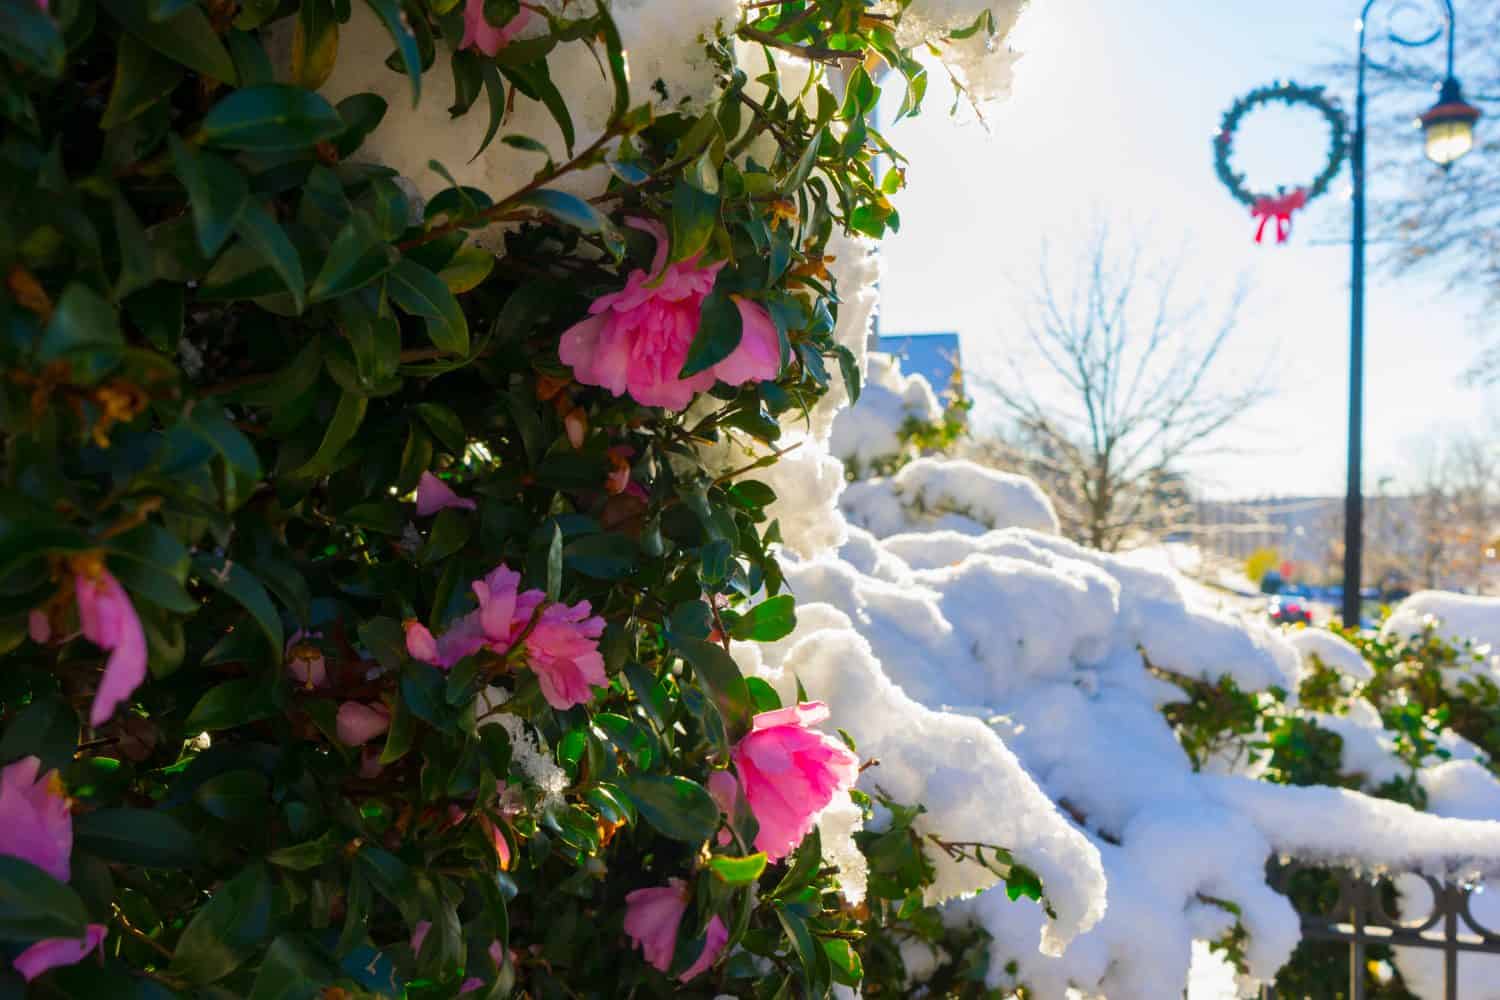 Pink sasanqua camellia bush under the snow. Street view, sunny winter day. Rose blossom under the snow. Flowers under the snow. Flower in difficult weather conditions. After snowstorm in Georgia, USA